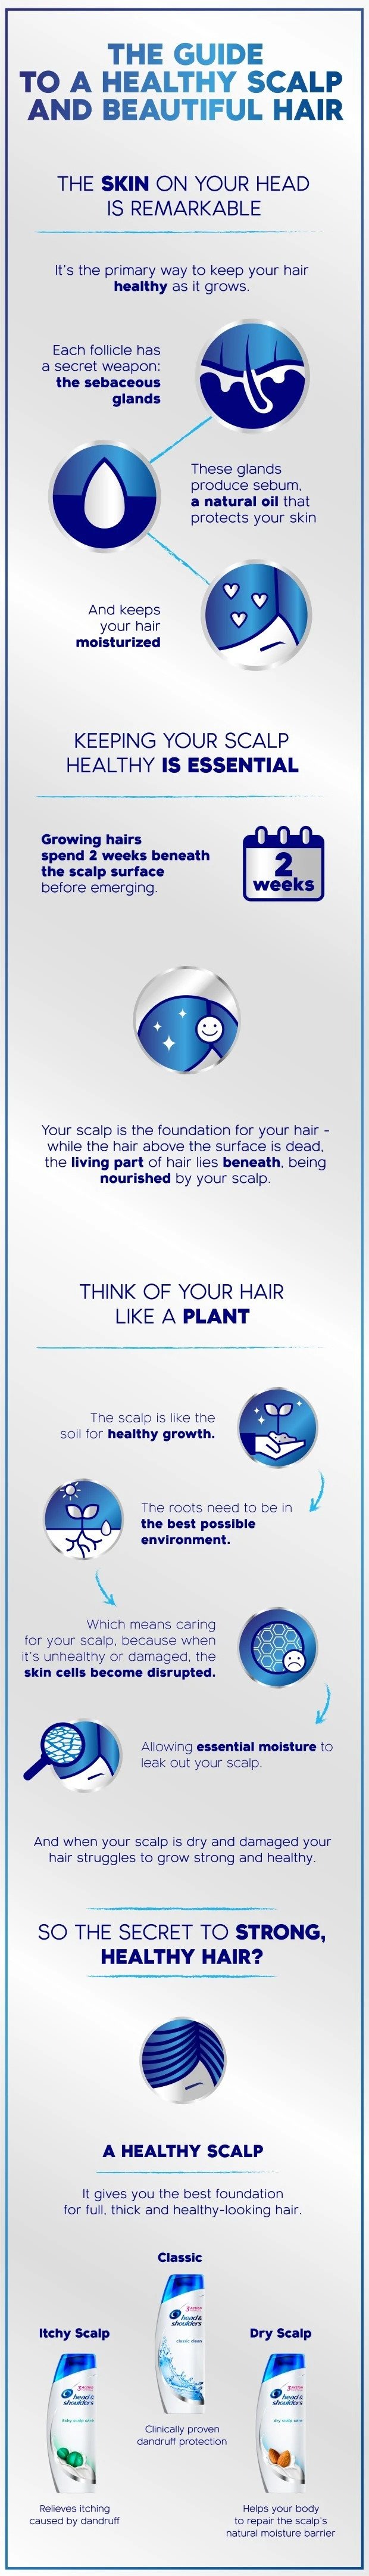 Infographic: How Switching Your Shampoo Affects Your Hair?